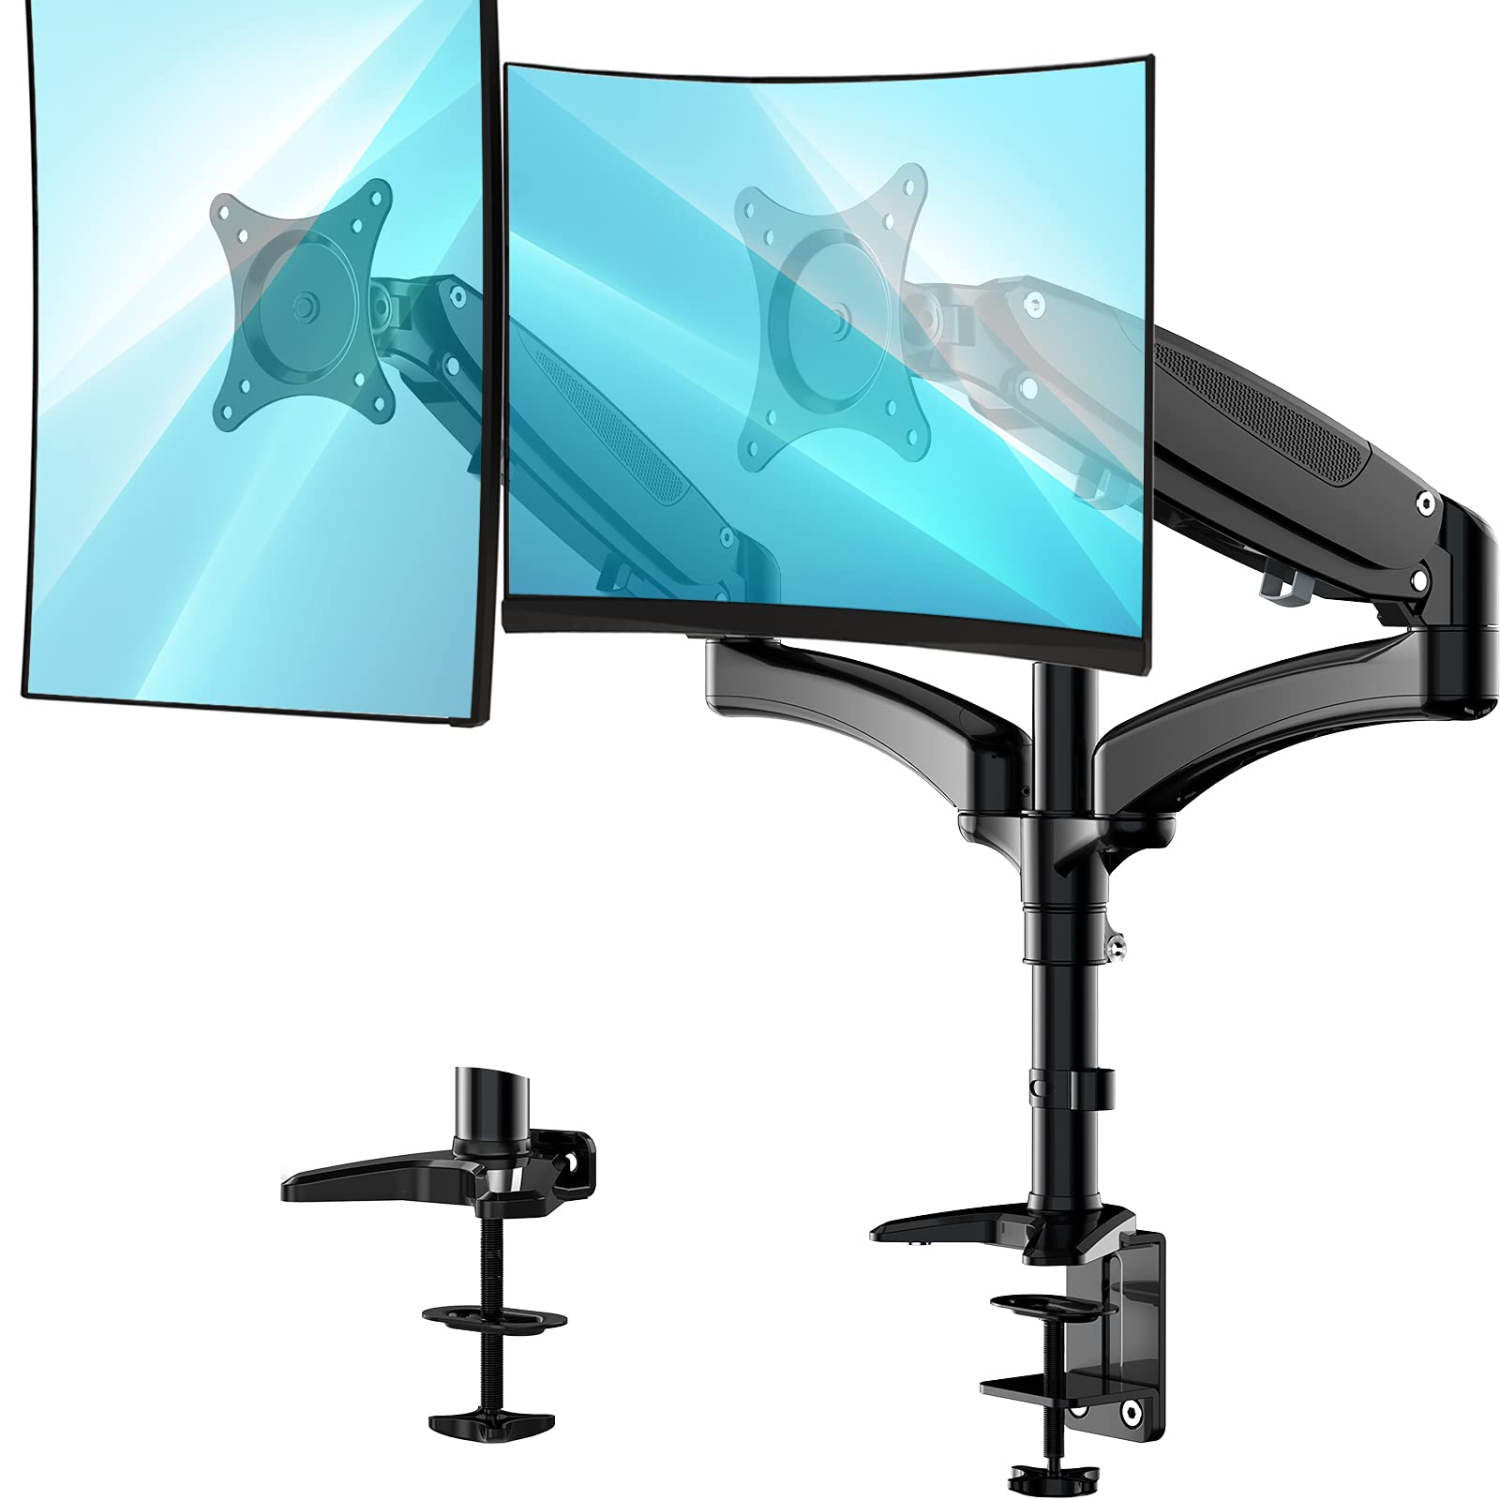 HUANUO Dual Arm Adjustable Gas Spring Computer Monitor Desk Mount - Fits 2, 13 to 27 Inch Screens,